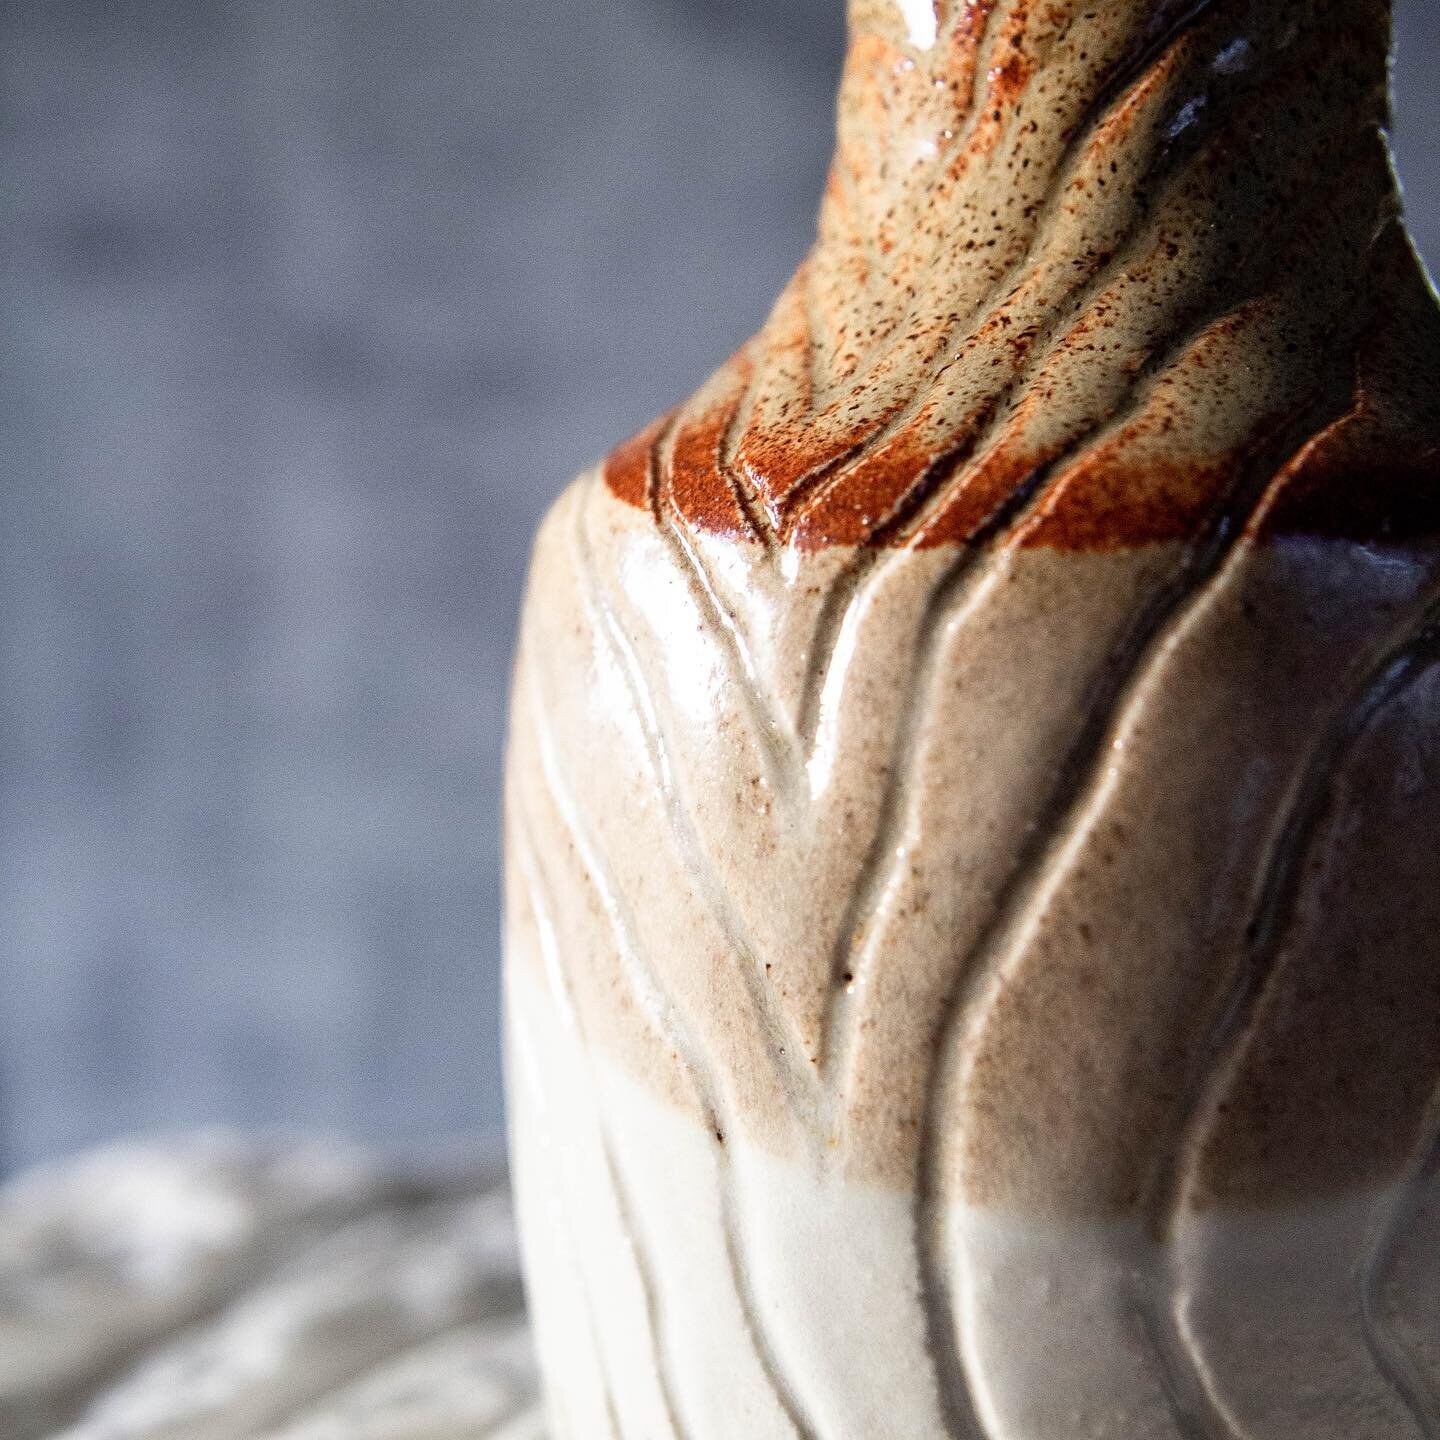 Thank you to all of your support with the launch of my online ceramics store yesterday! 🥳 I appreciate all of the love for my art! You guys have been amazing! 🙏

Pictured here is a close up of a vase I carved by hand. I love how the two glazes over